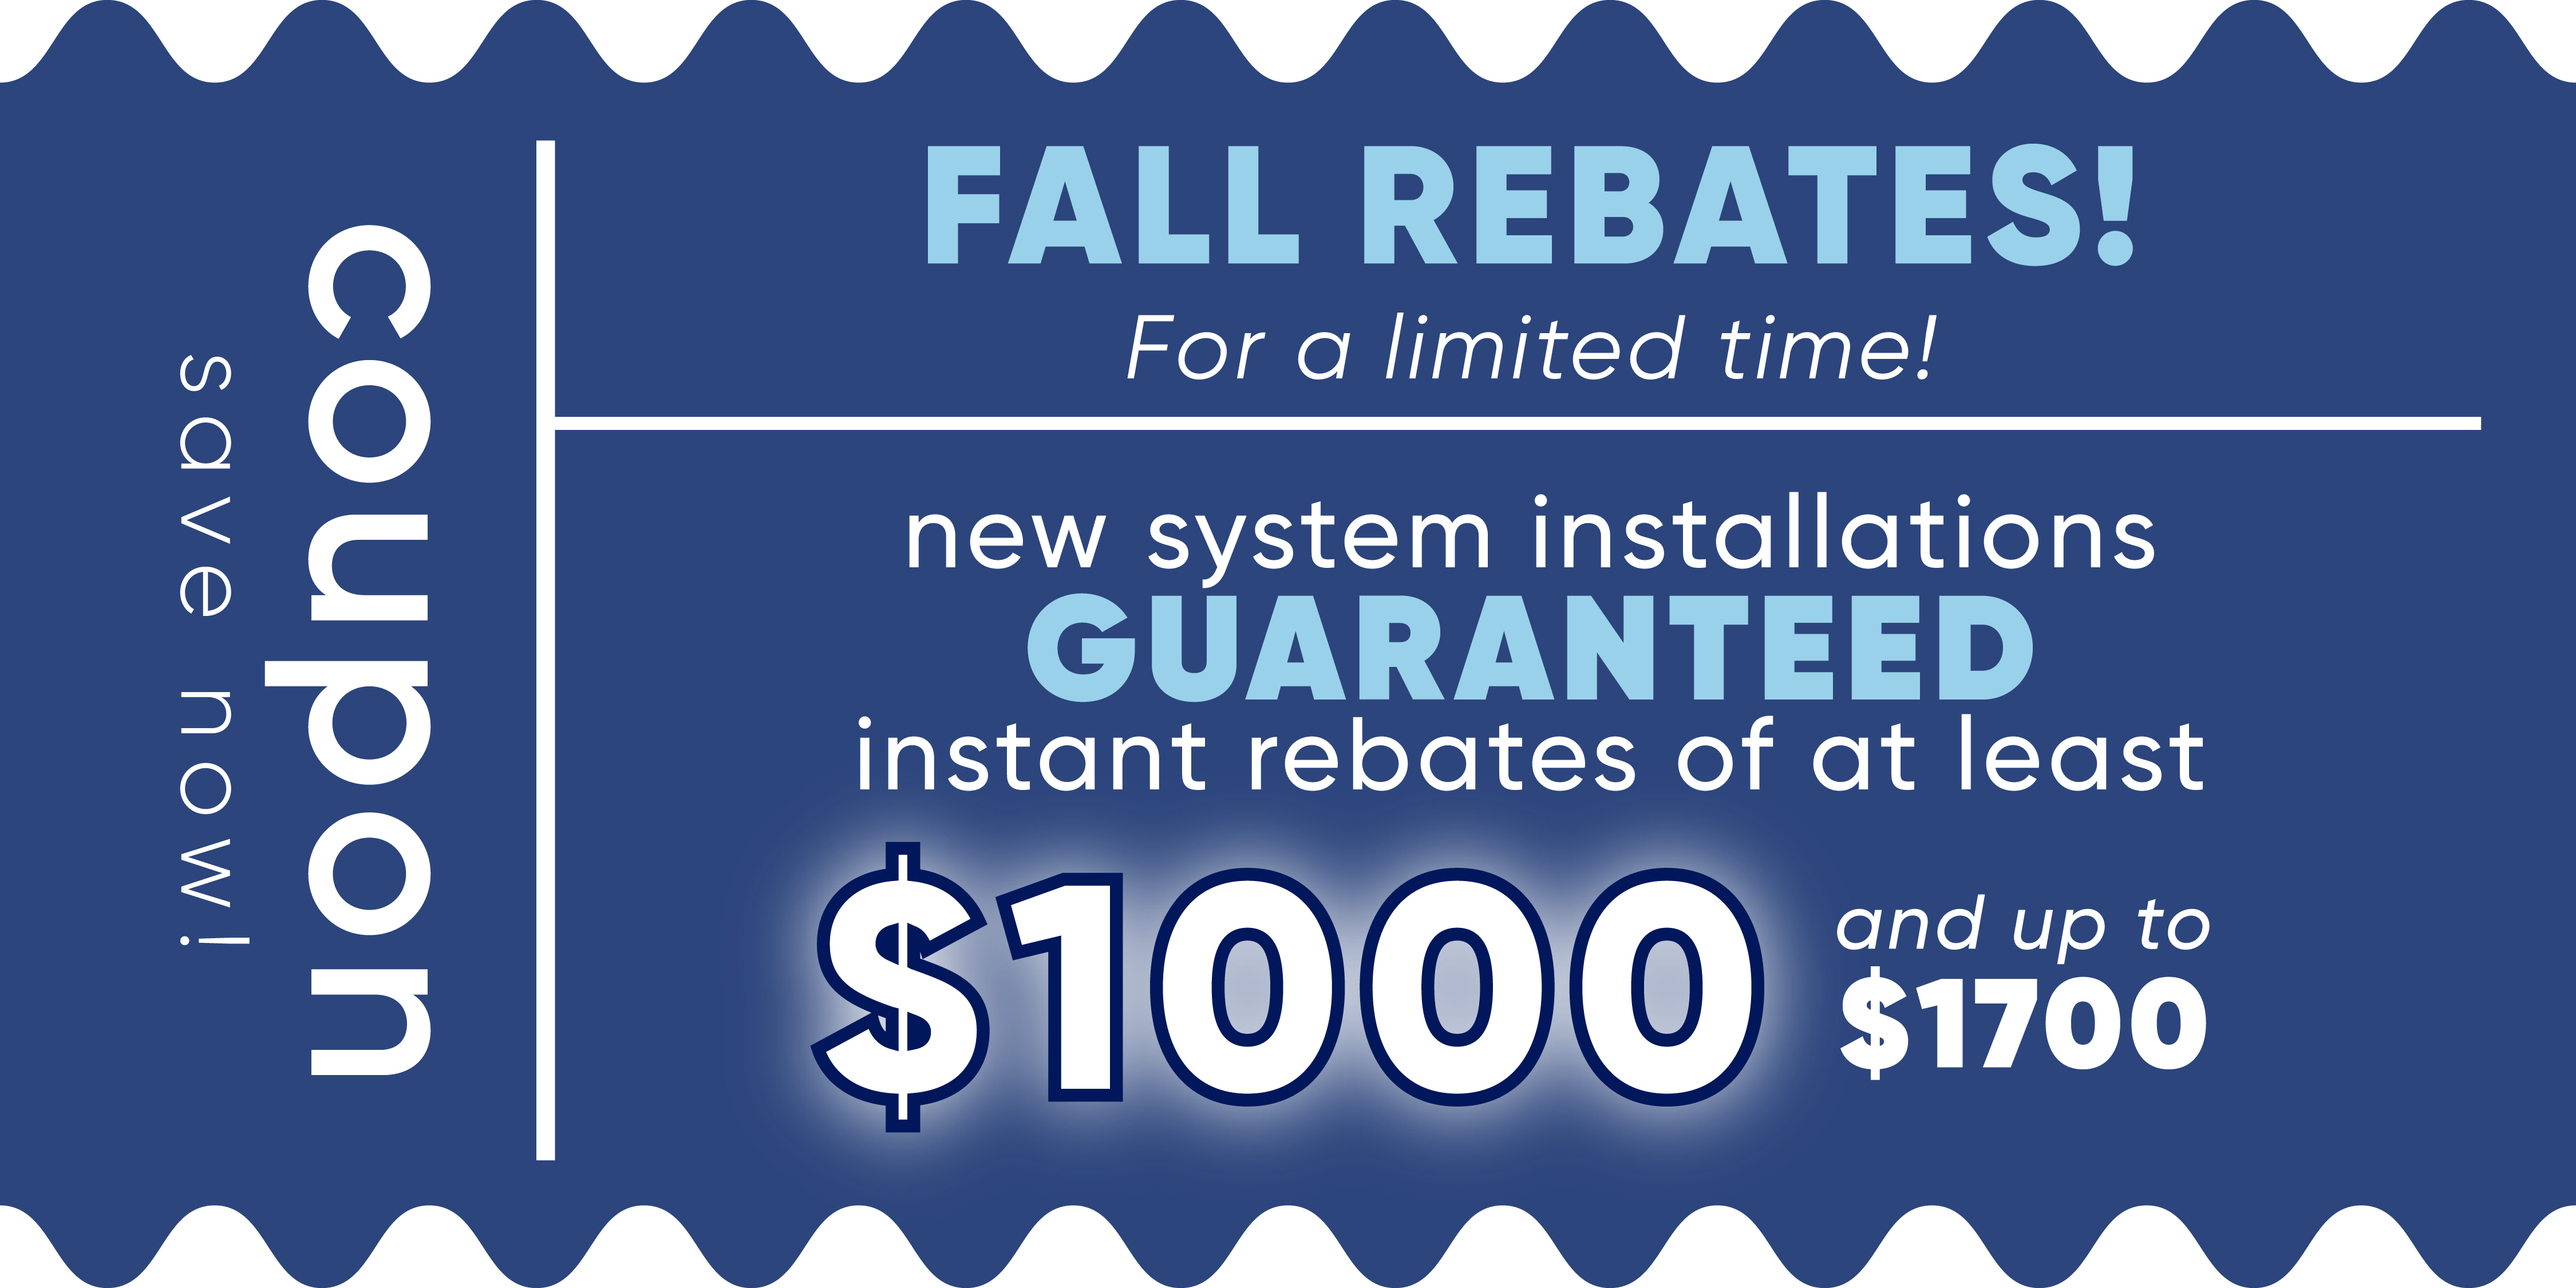 Get your new HVAC system for as little as $65 per month